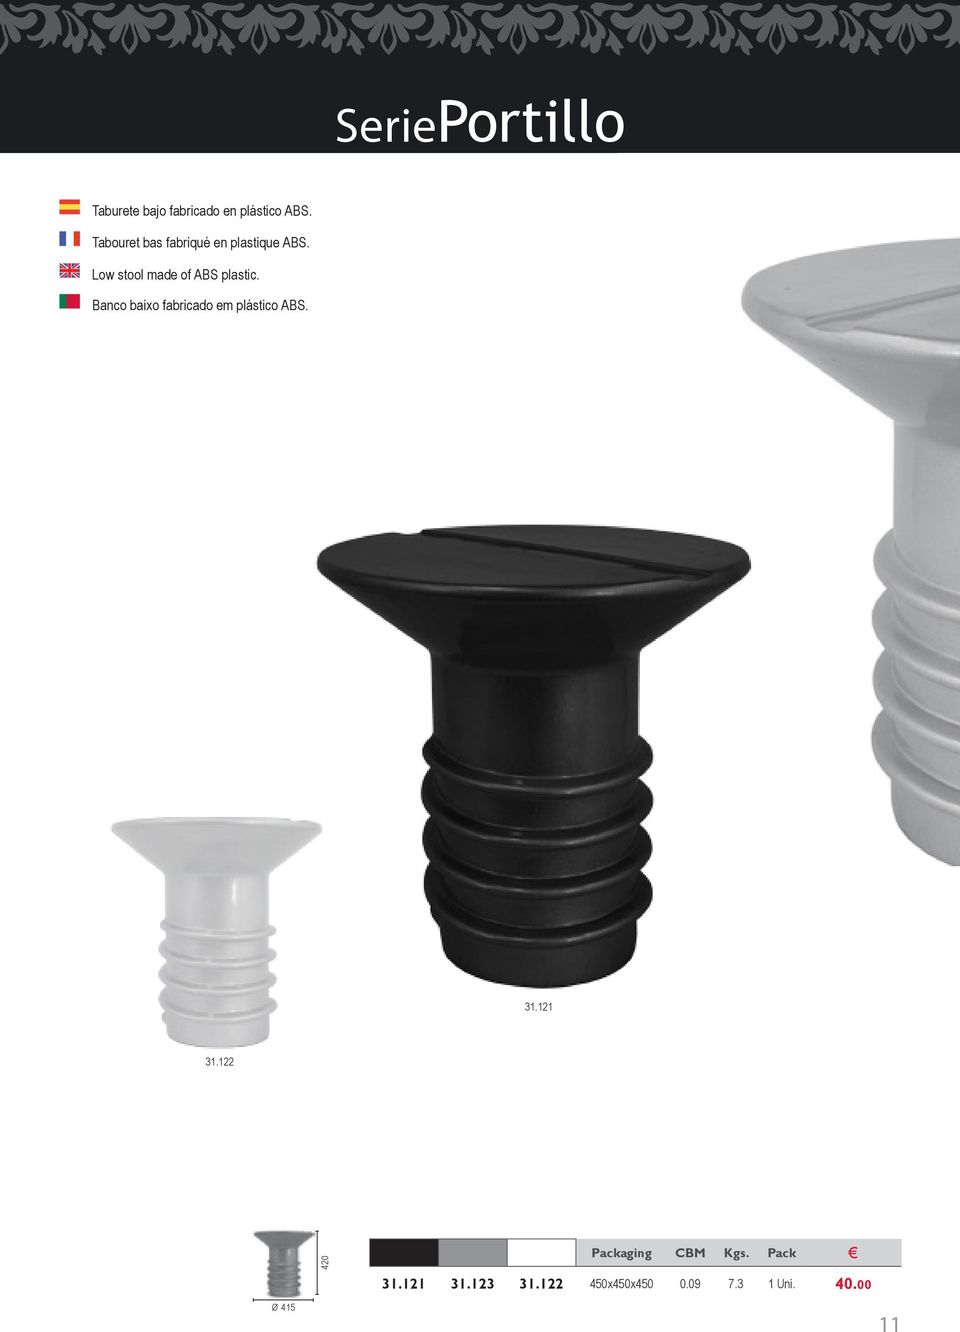 Low stool made of ABS plastic.